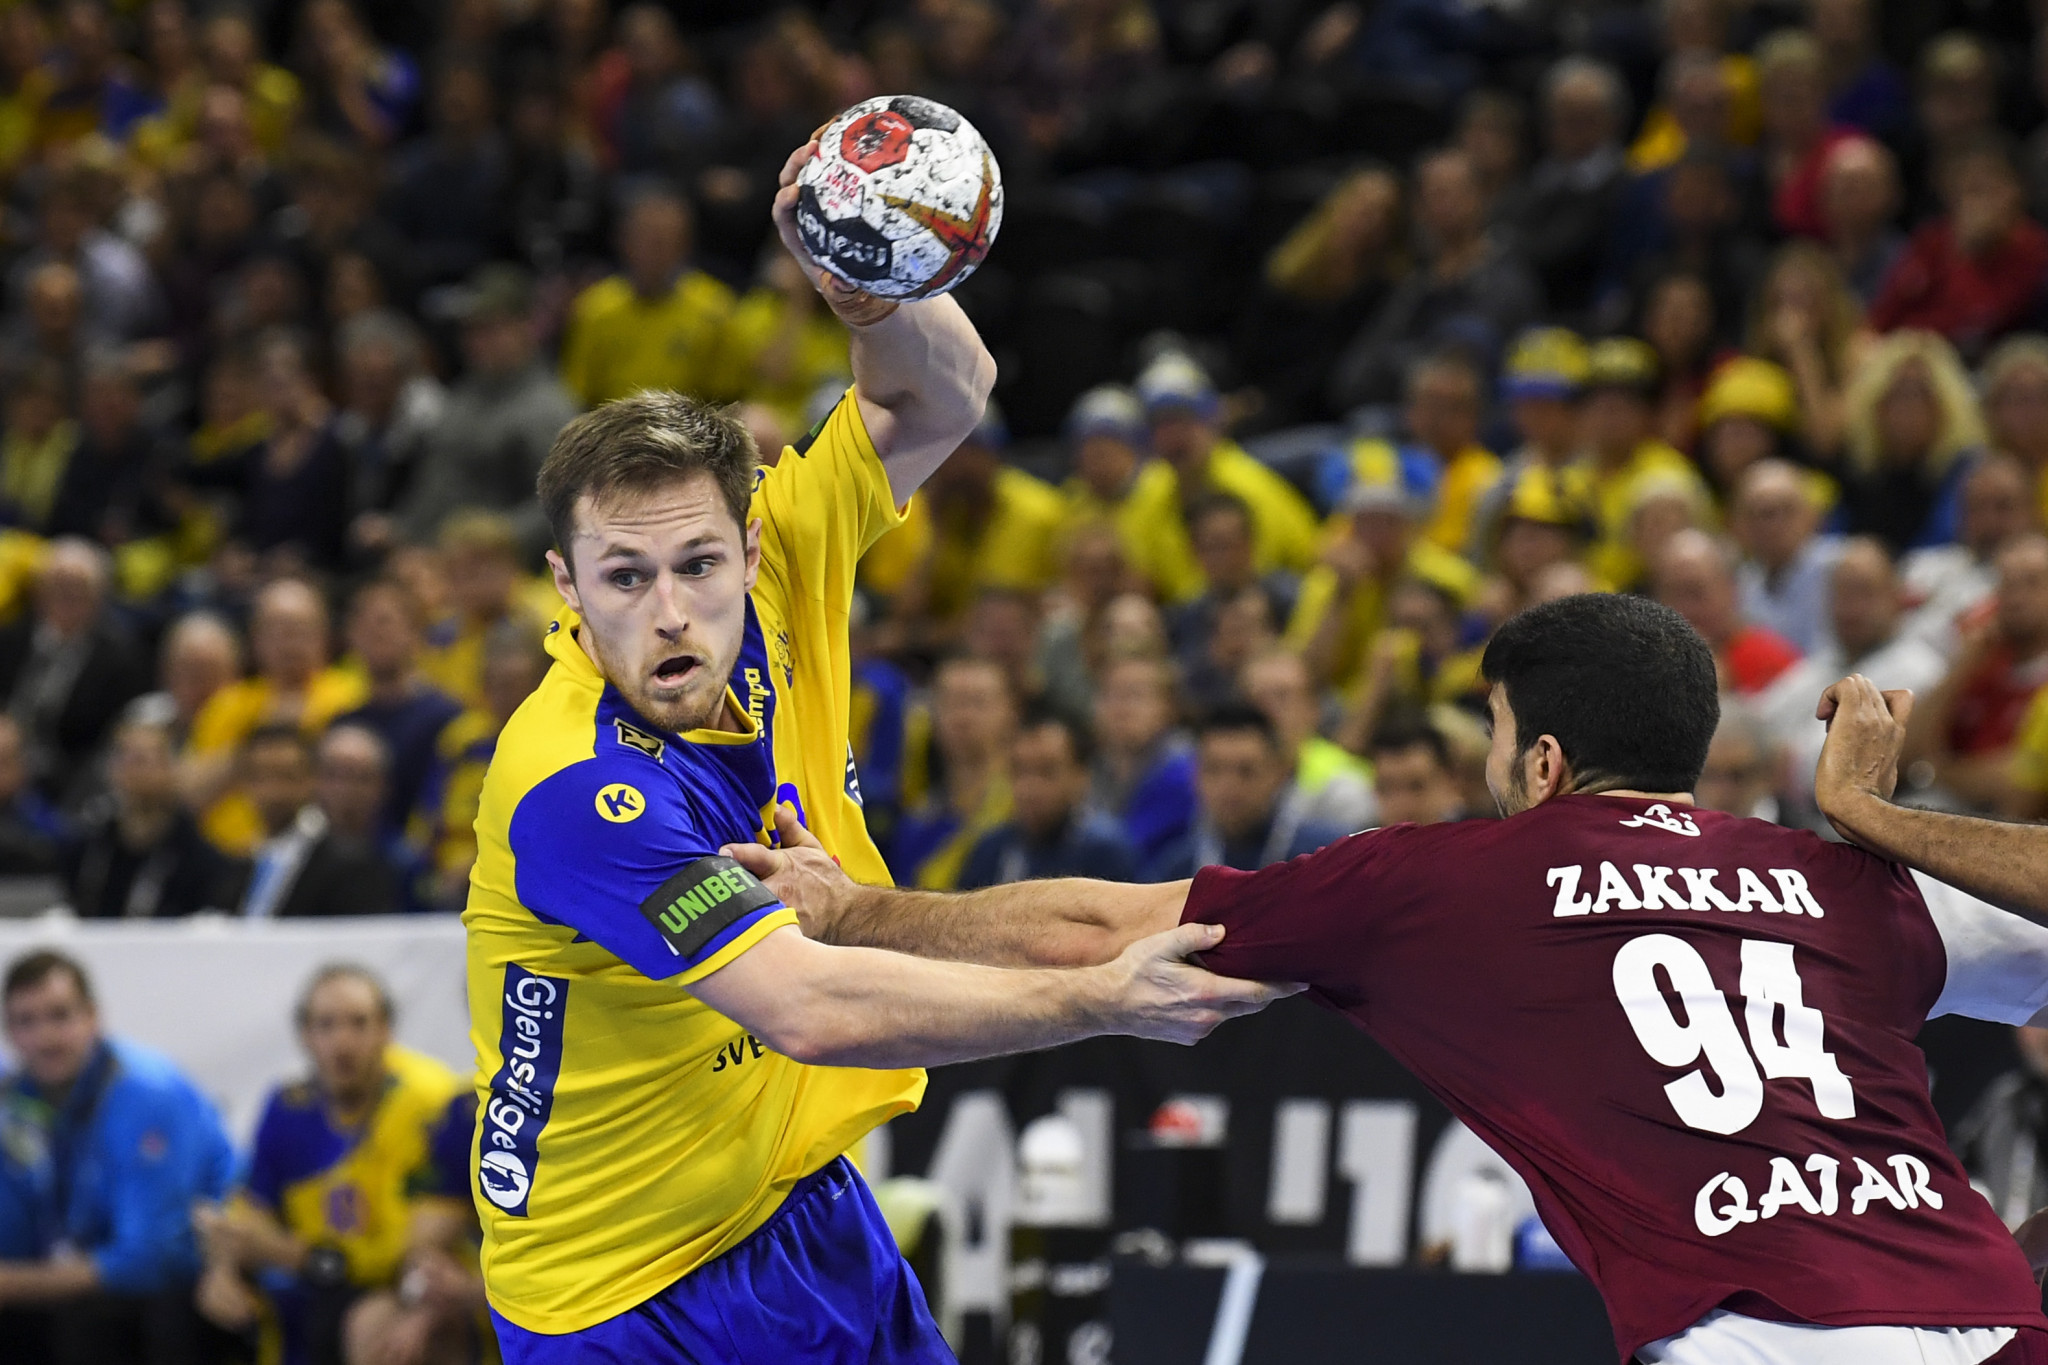 Sweden defeated Qatar in Group D of the IHF Men's Handball World Championship to remain undefeated at the competition ©Getty Images